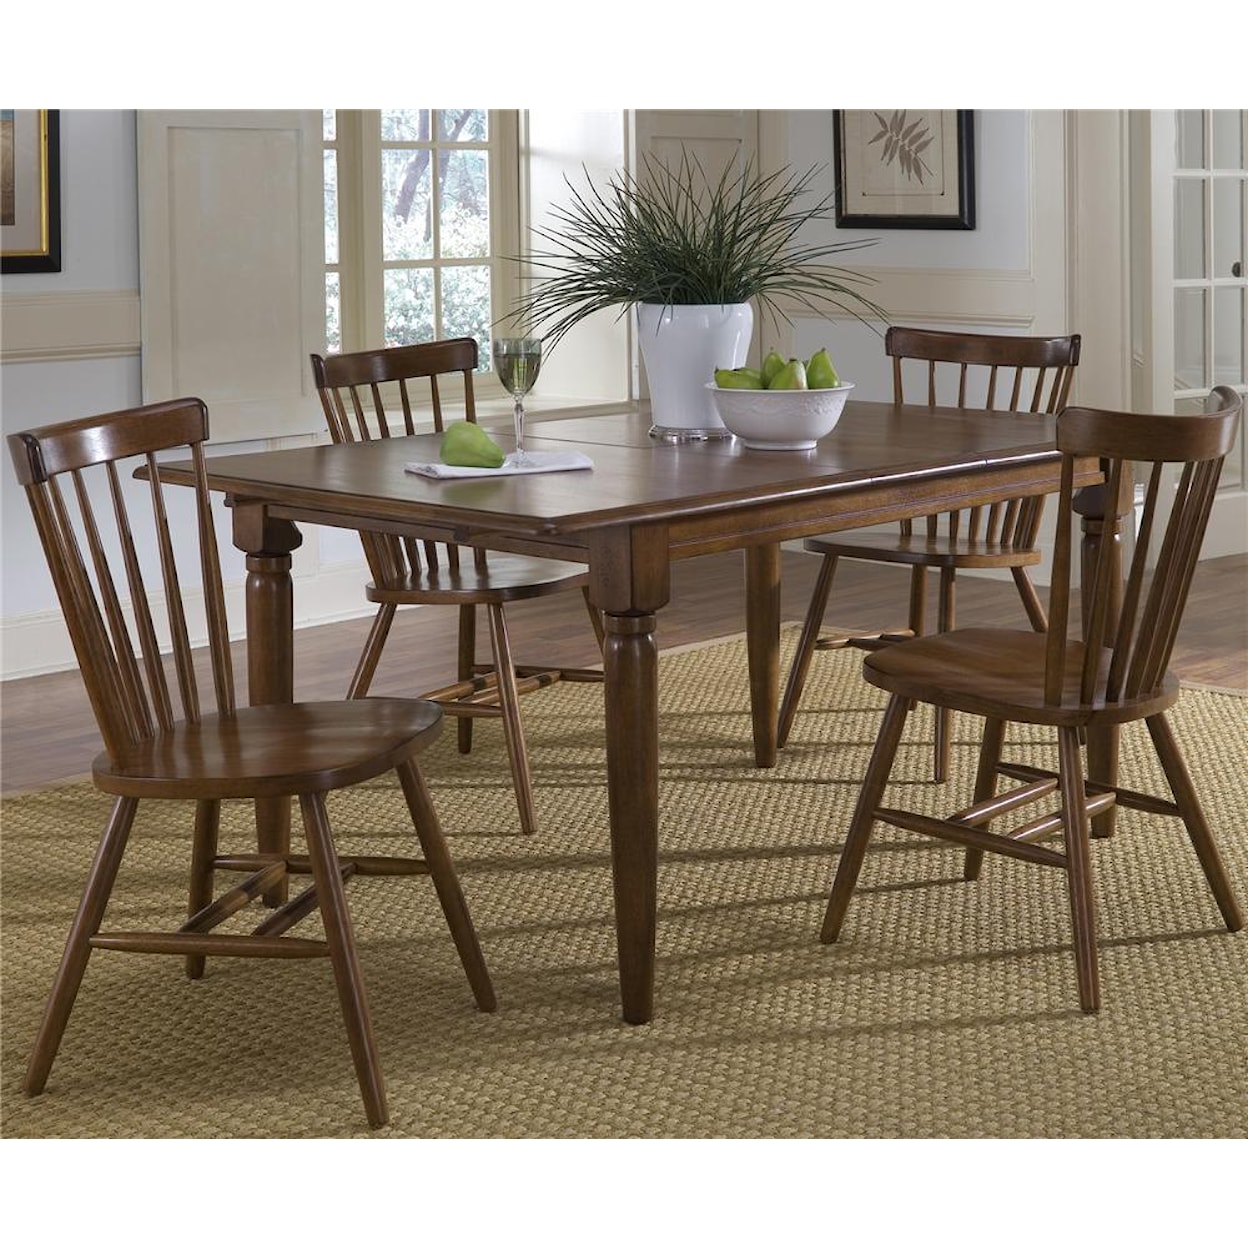 Libby Creations II 5-Piece Dining Set